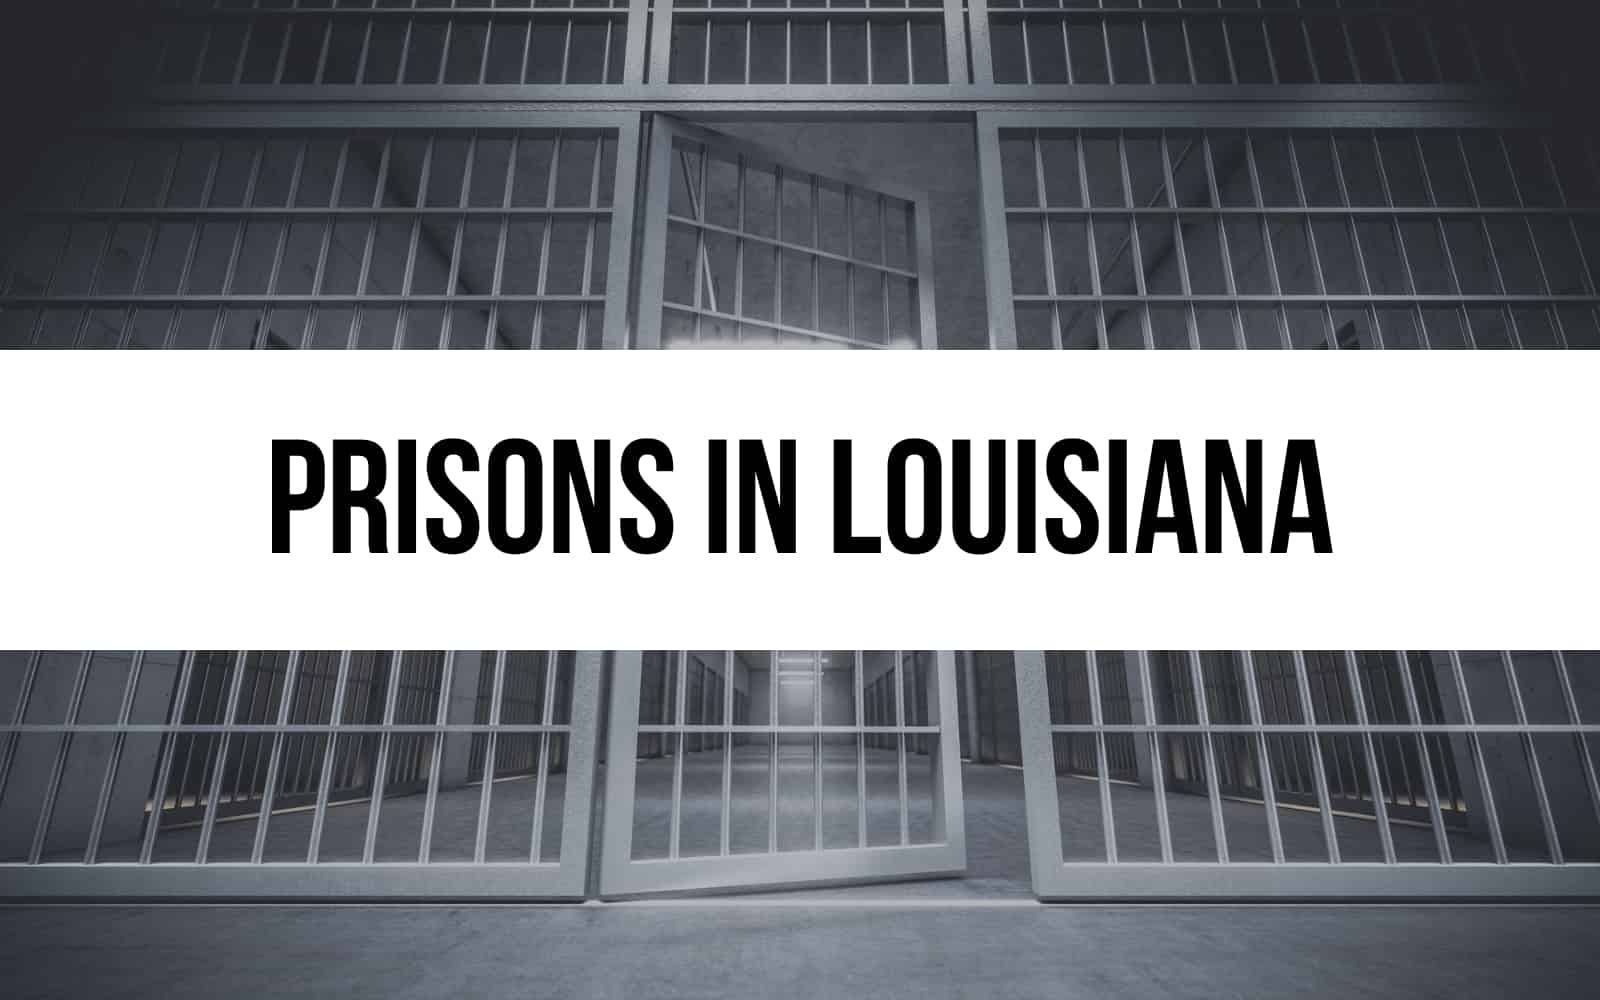 10 Prisons in Louisiana: Inside the Correctional System